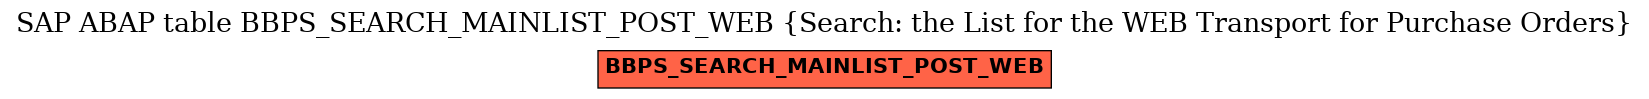 E-R Diagram for table BBPS_SEARCH_MAINLIST_POST_WEB (Search: the List for the WEB Transport for Purchase Orders)